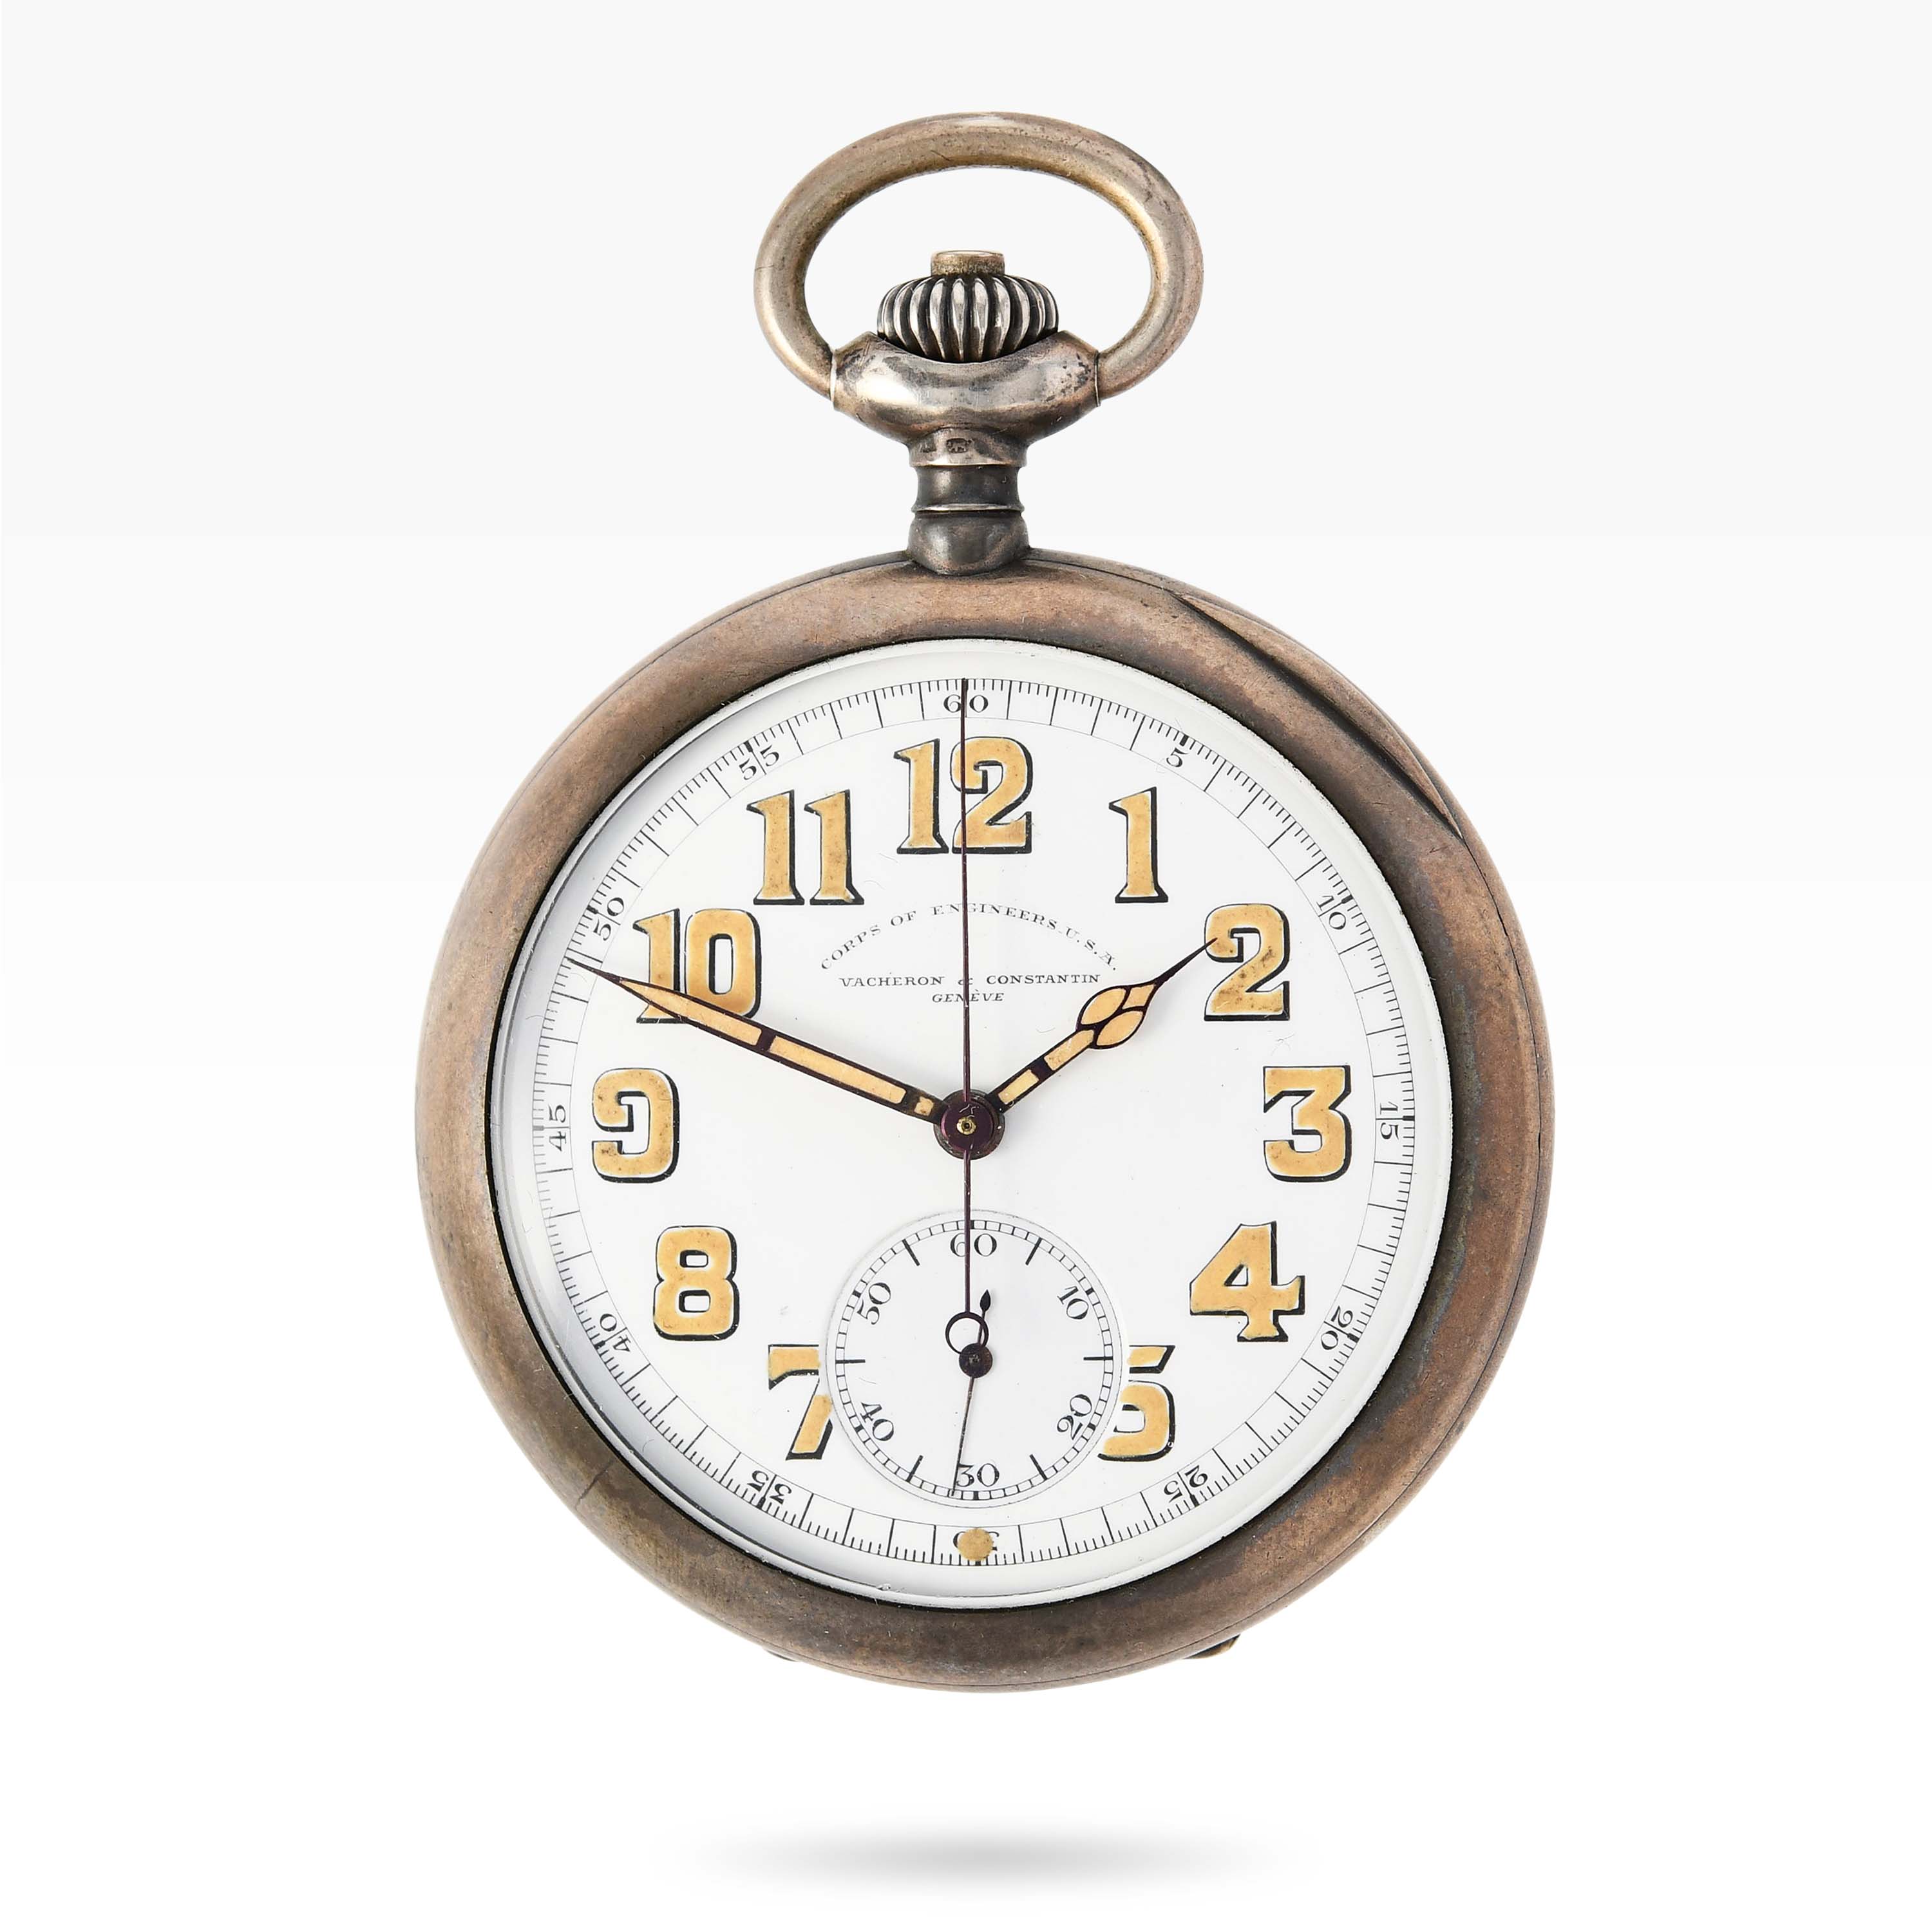 1326VC1 Vacheron Constantin Made for the Corps of Engineers (USA) pocket watch in silver img-main1